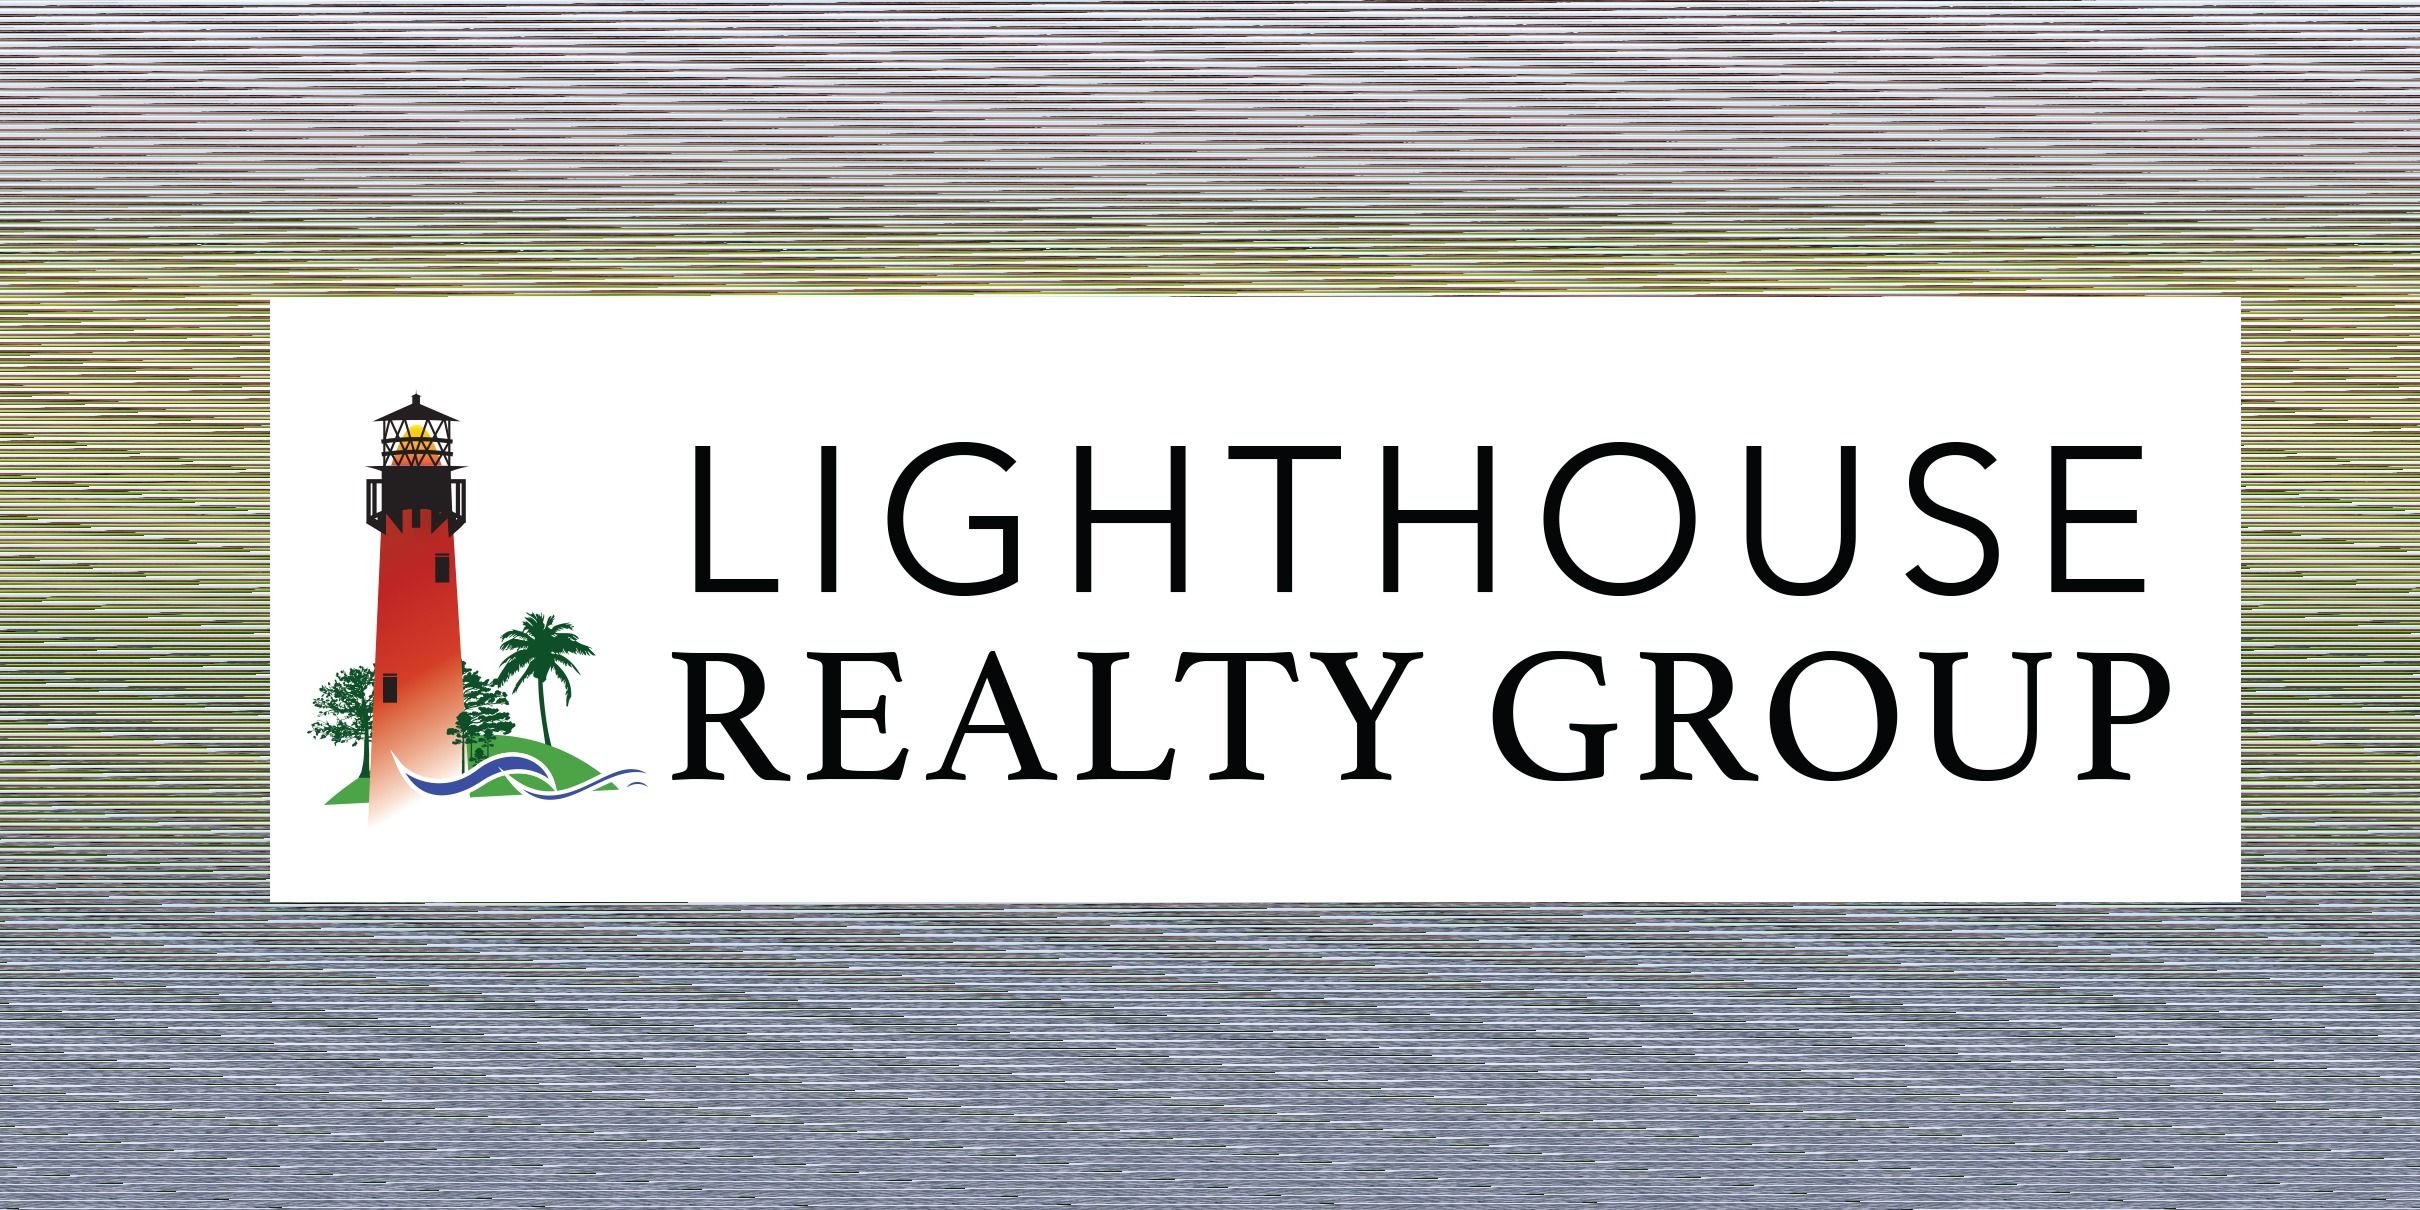 Lighthouse Realty Group, Inc